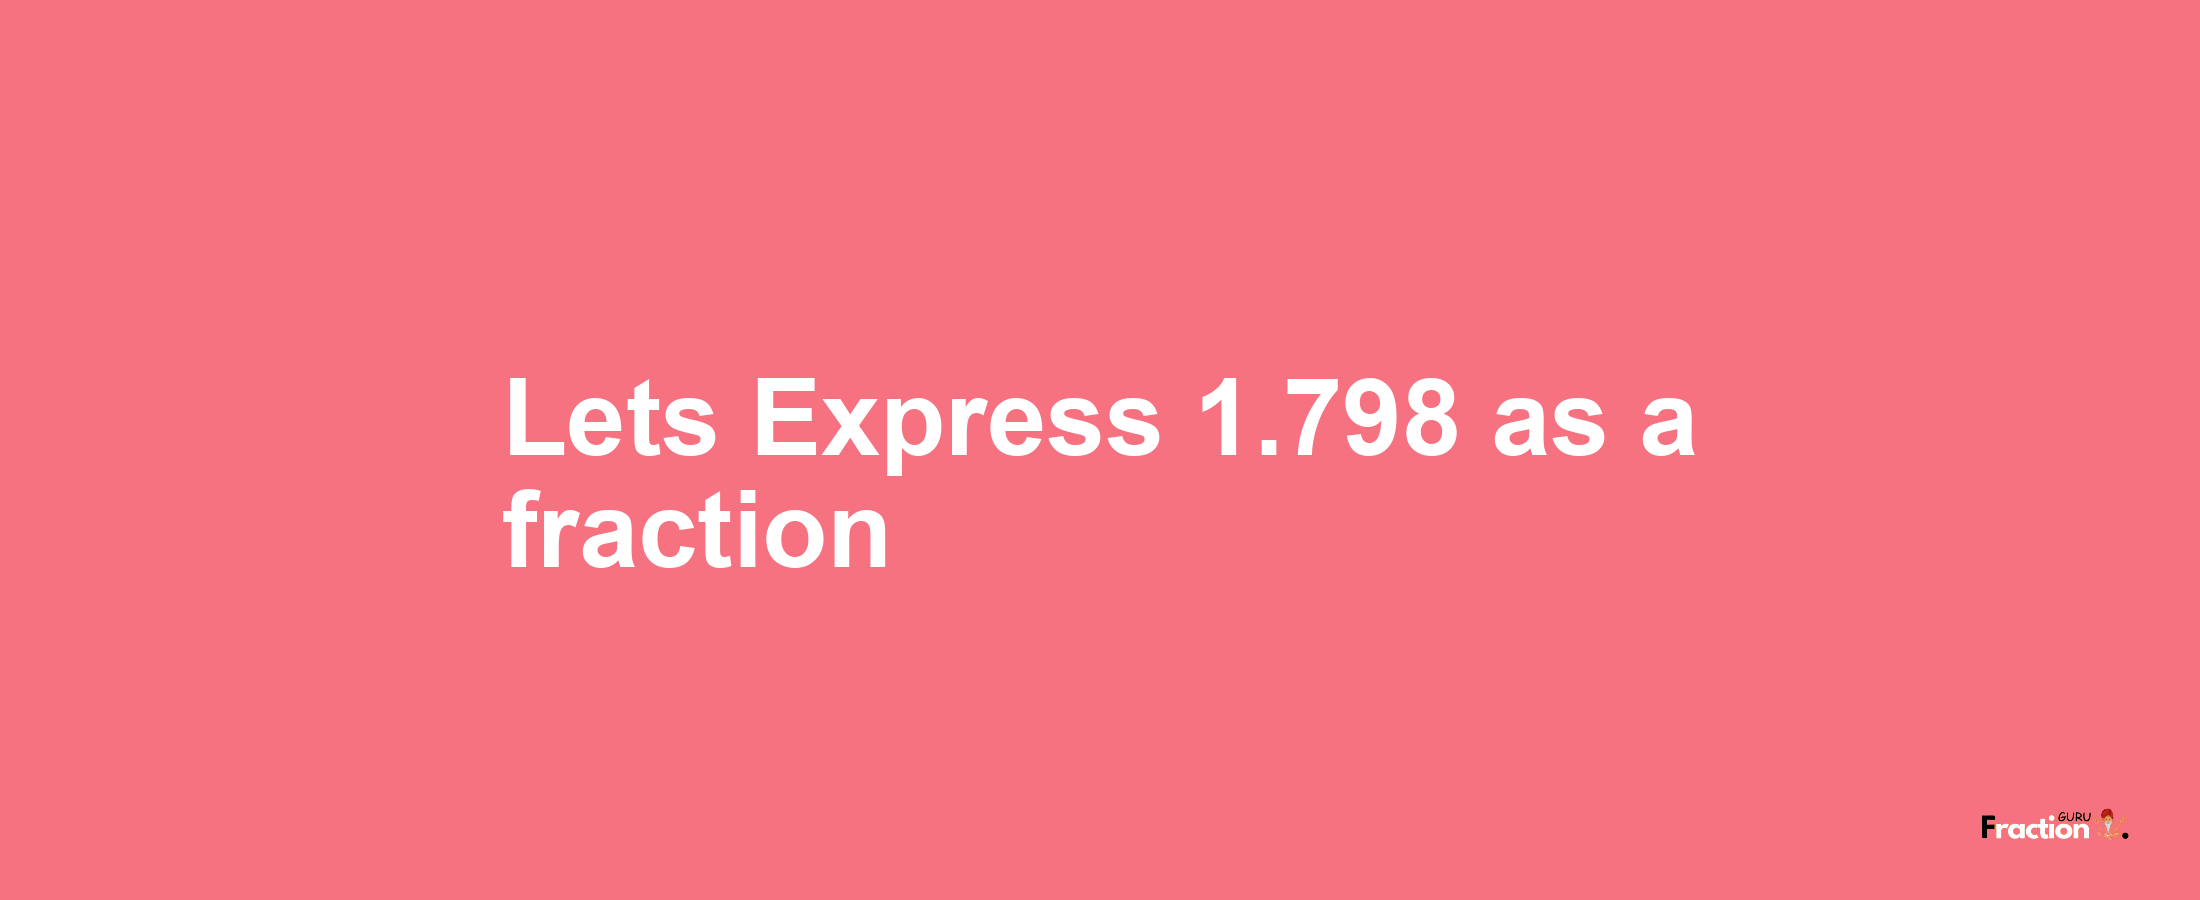 Lets Express 1.798 as afraction